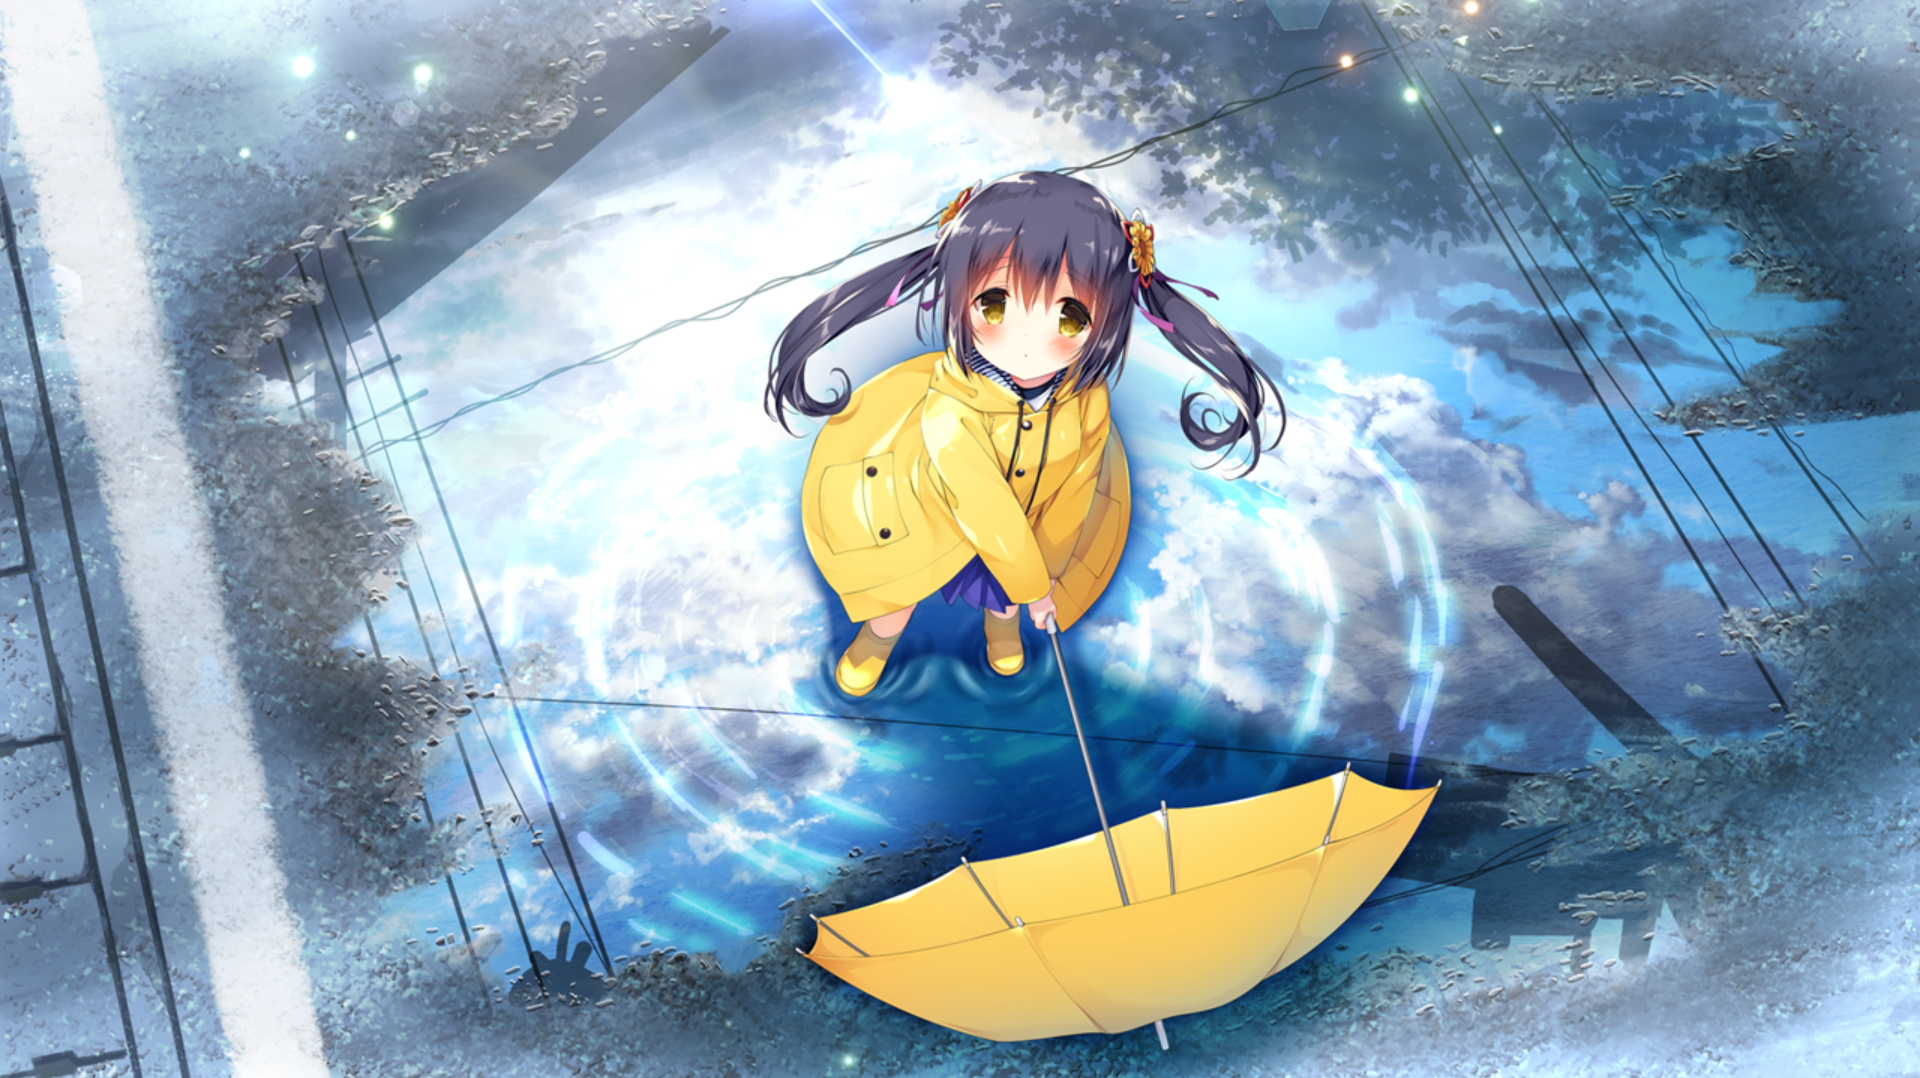 Camus In The Blue Sky Water Galgame Looking Up Umbrella Sunlight Reflection Clouds Blushing Twintail 1920x1078